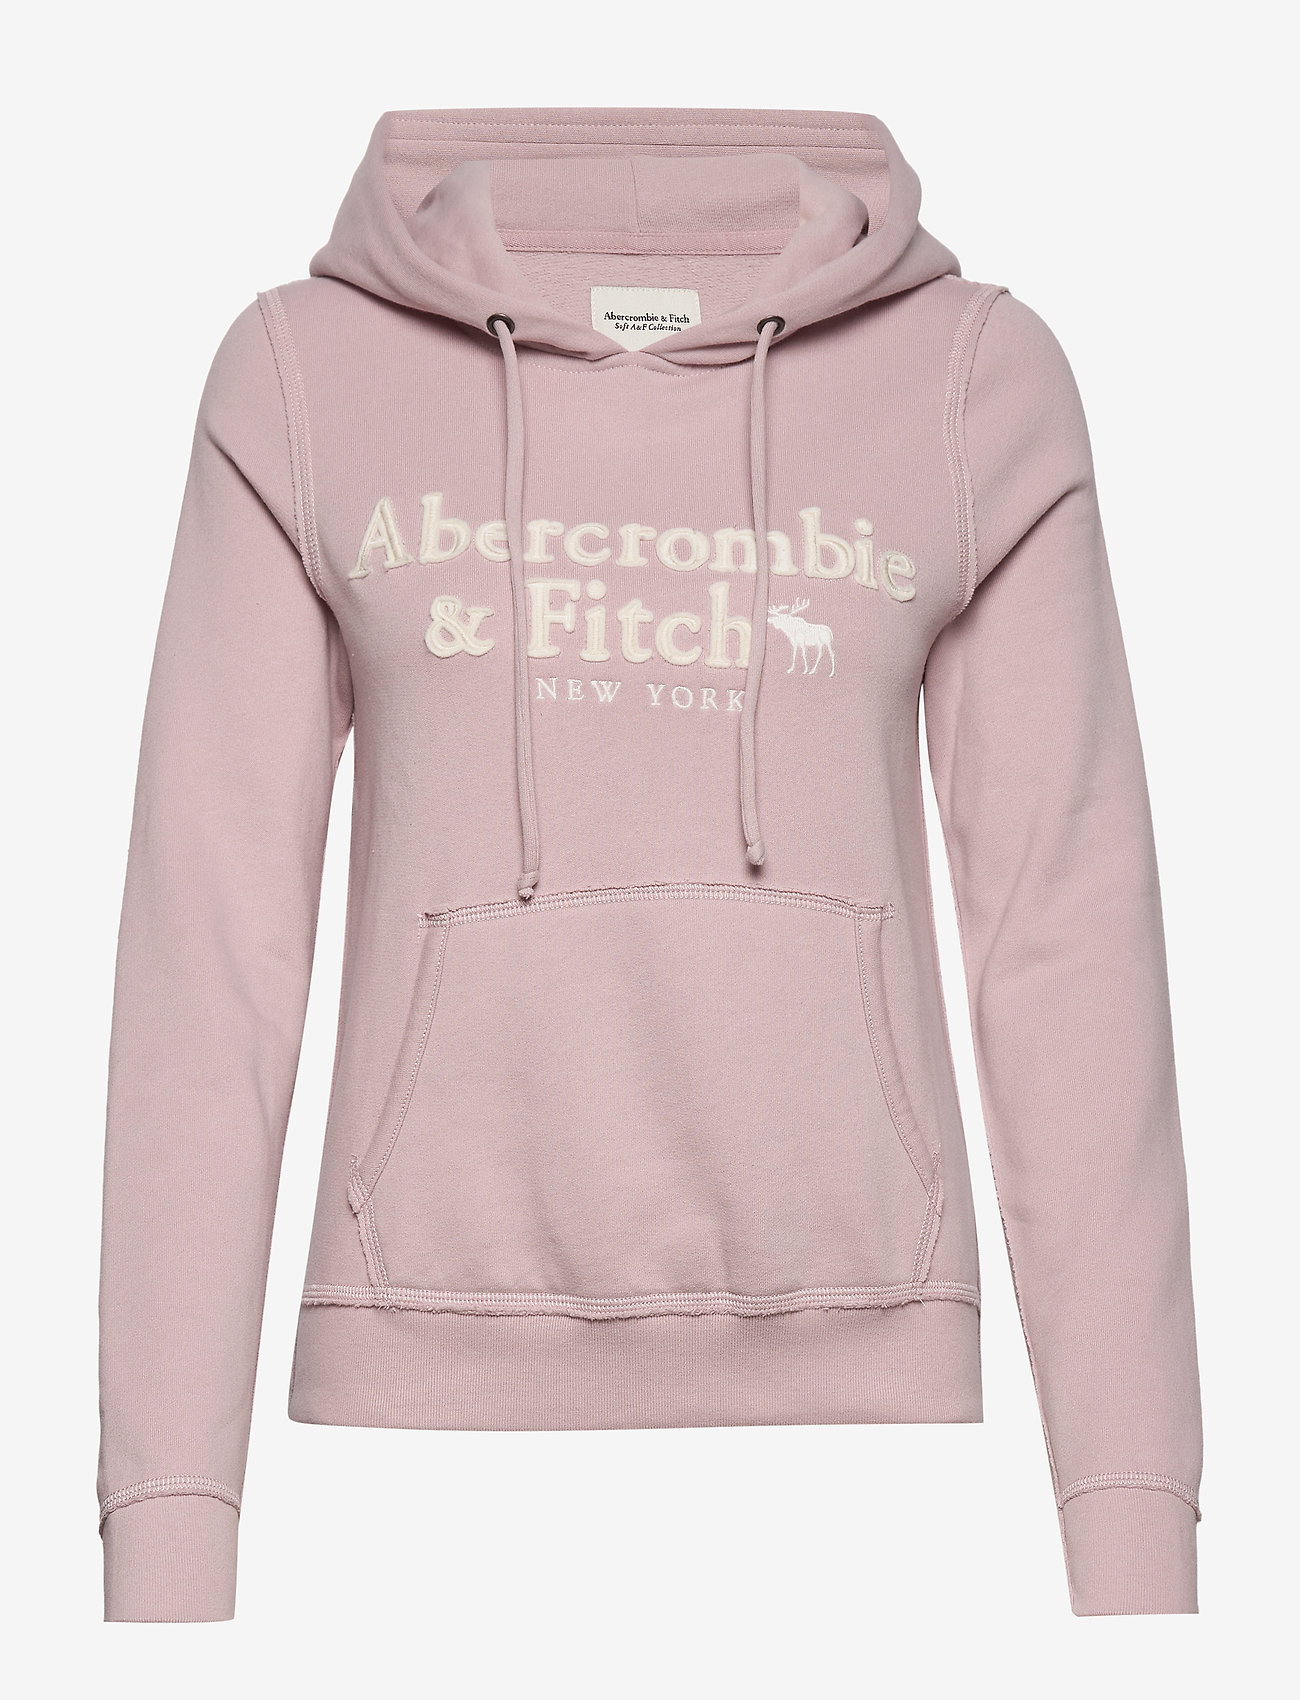 abercrombie and fitch sweatshirt